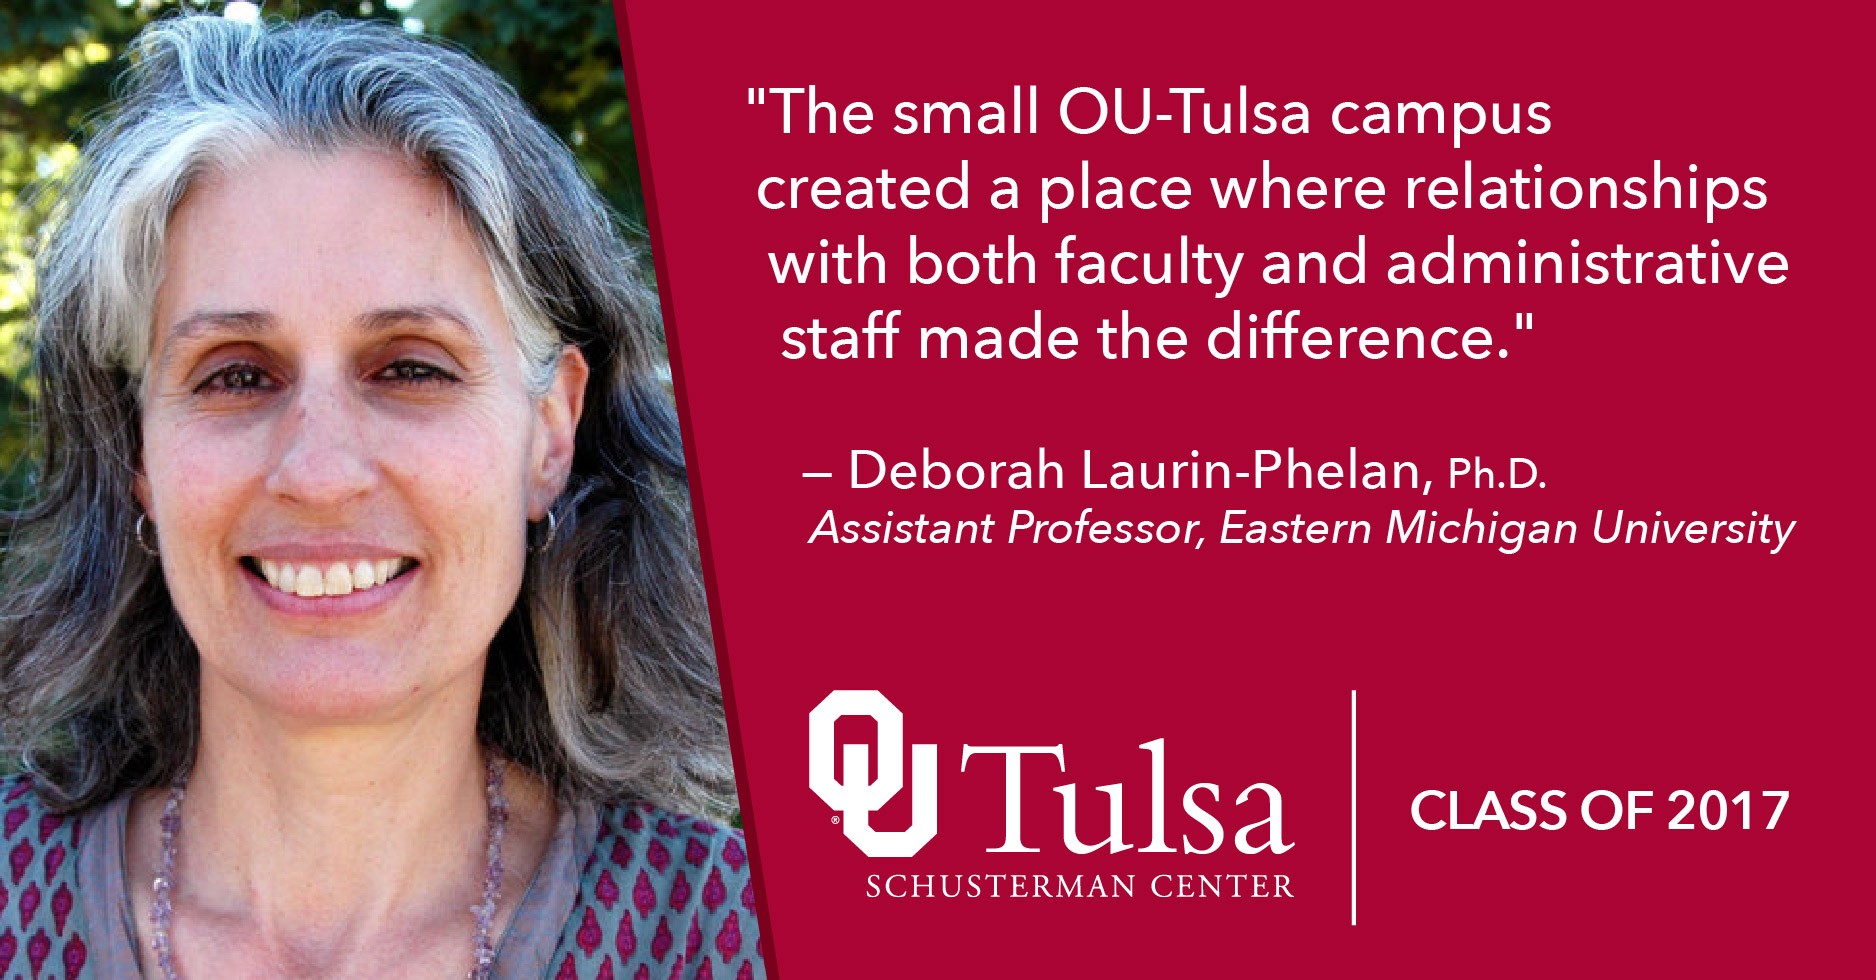 "The small OU-Tulsa campus created a place where relationships with both faculty and administrative staff made the difference."  — Deborah Laurin-Phelan, Ph.D. Assistant Professor, Eastern Michigan University